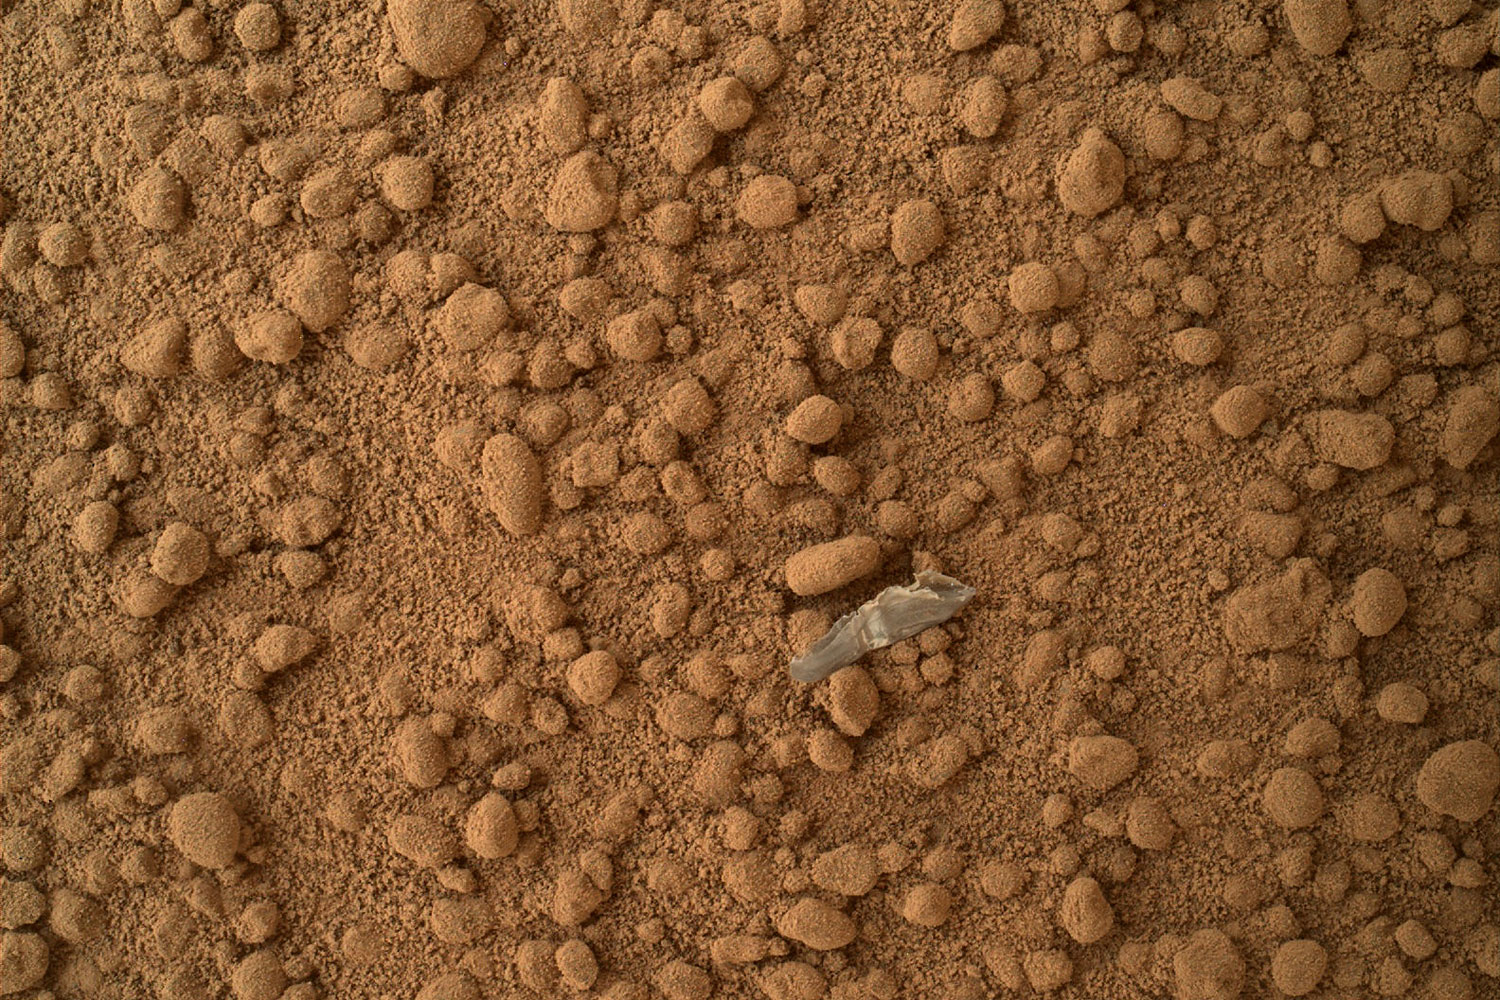 A small bright object on the ground beside the rover at the "Rocknest" site. The rover team has assessed this object as debris from the spacecraft, possibly from the events of landing on Mars.